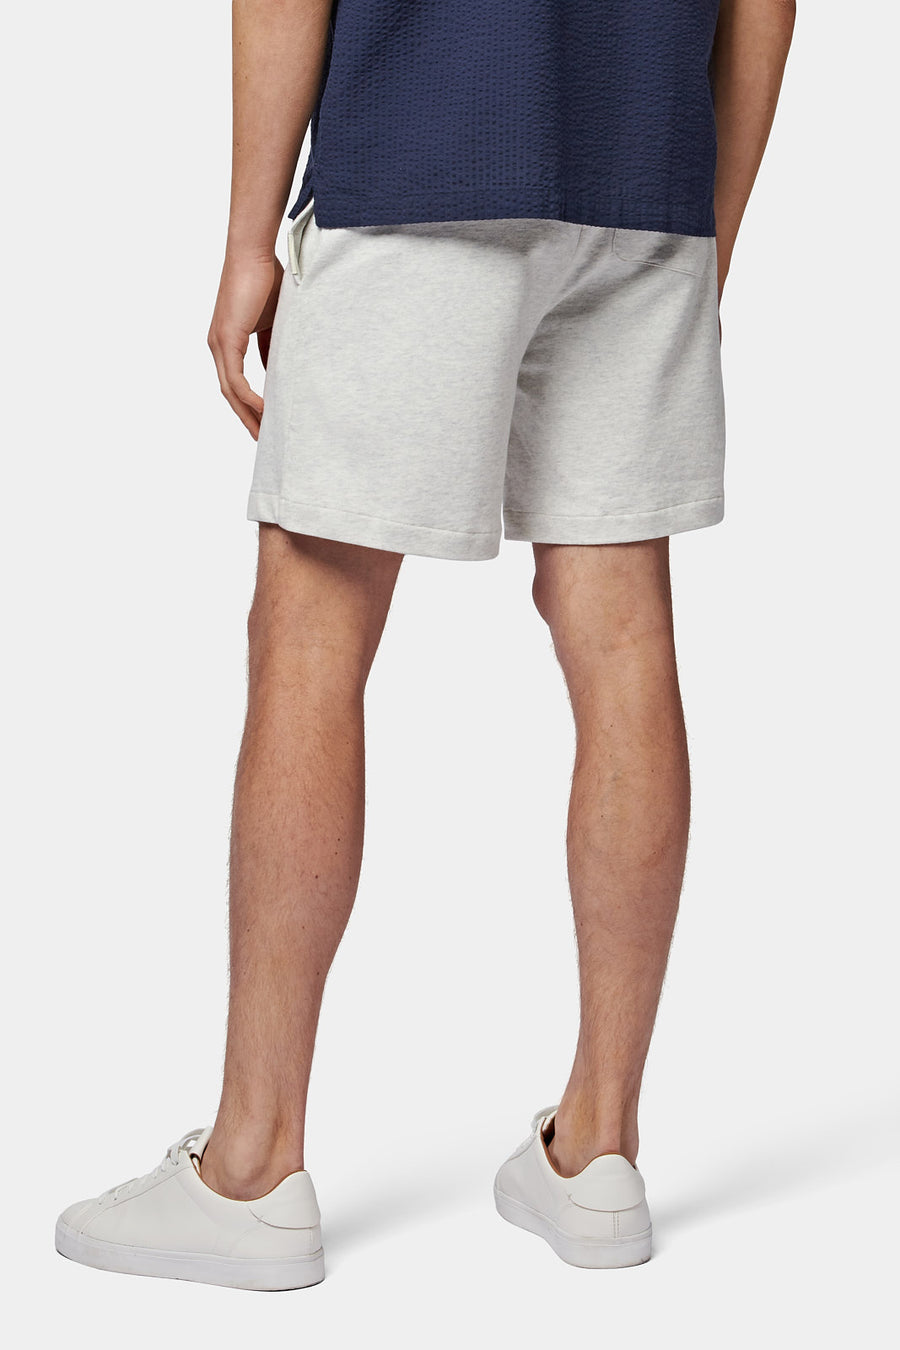 Essential French Terry Shorts in Grey Marl